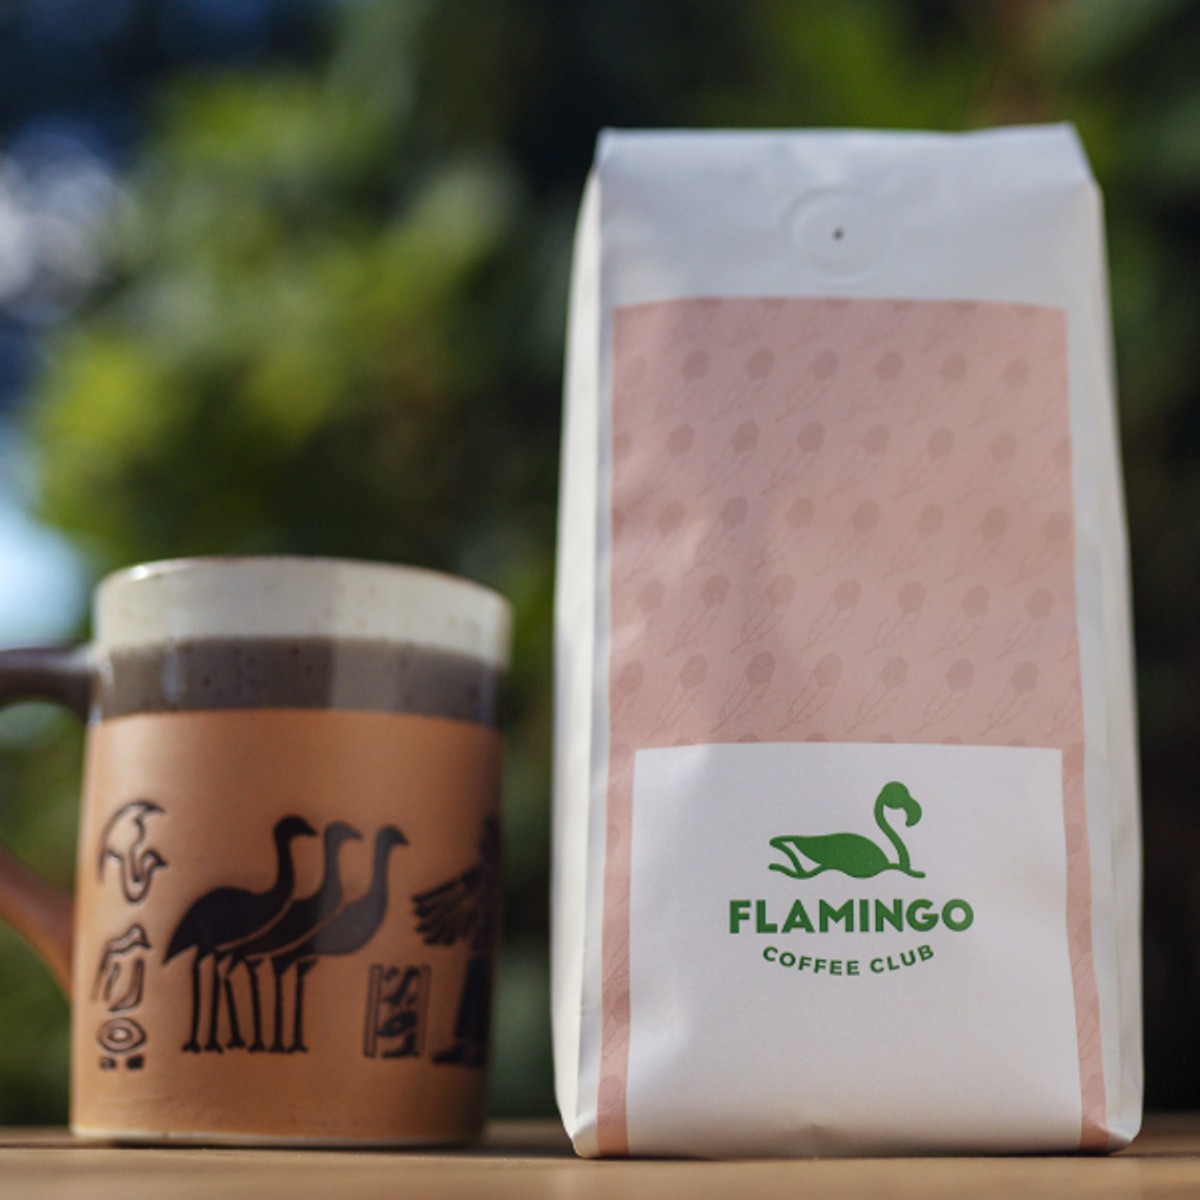 Flamingo Coffee Club recently soft-launched with a trial subscription service on its website.